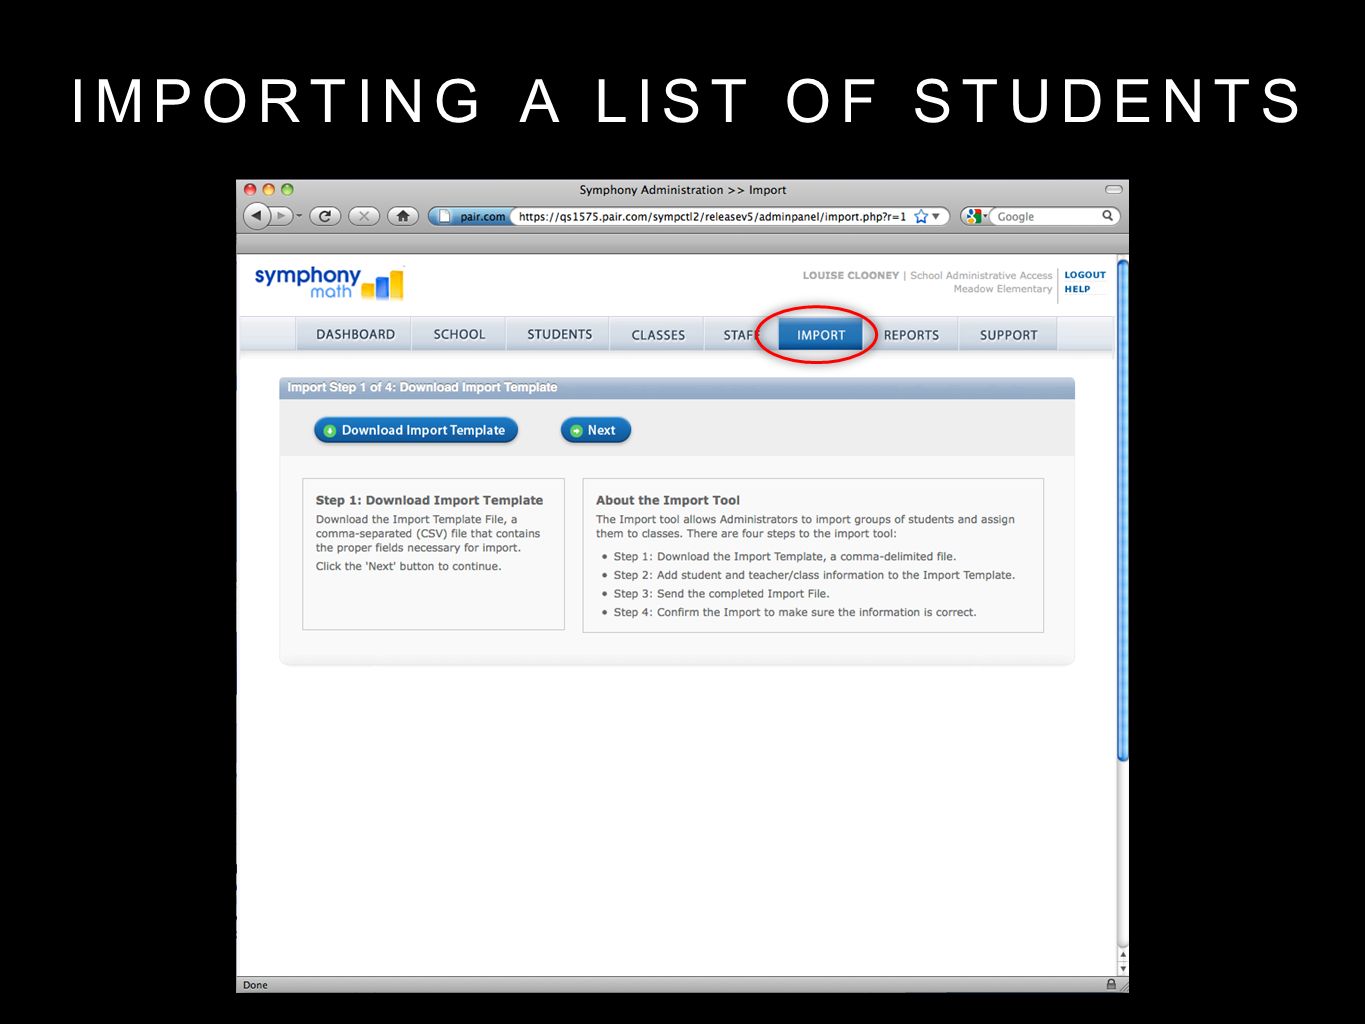 IMPORTING A LIST OF STUDENTS